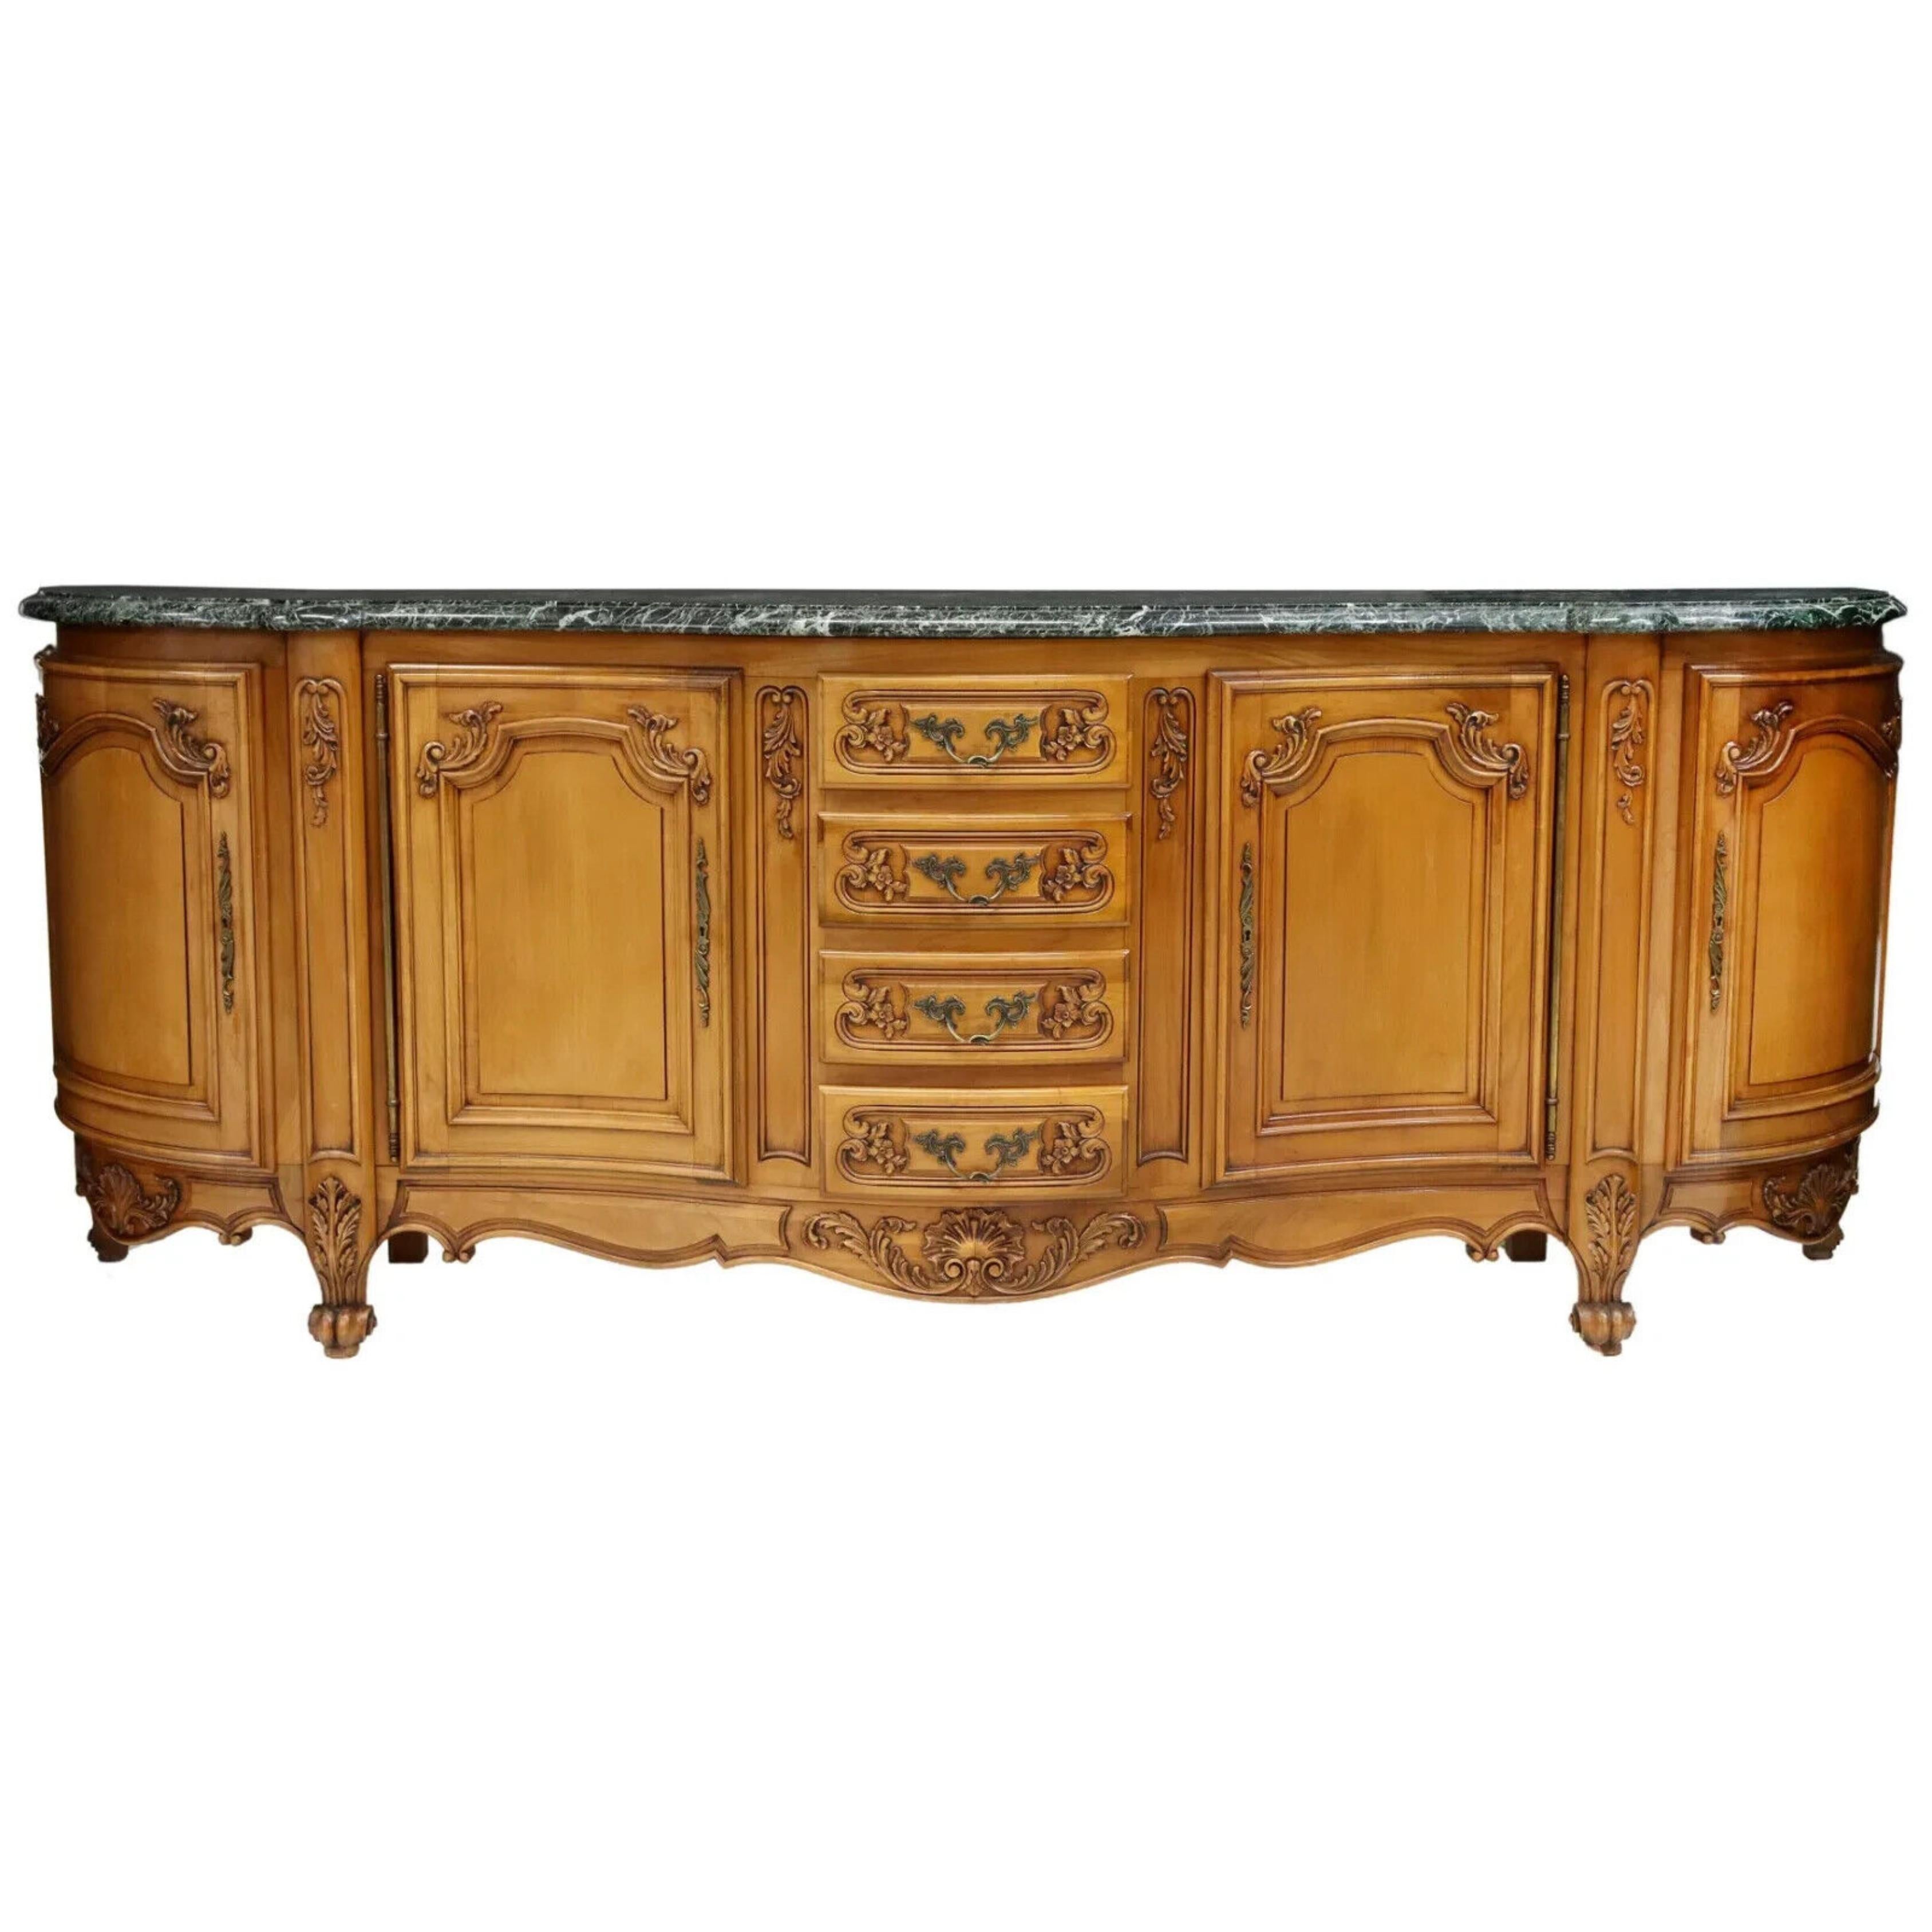 Gorgeous Sideboard, French Louis XV Style, Fruitwood, Marble Top,Shell, Foliate, 111.5 length, 20th C.. 1900's!

French Louis XV style fruitwood sideboard, 20th c., having shaped marble top, over conforming molded case, accented with carved shell